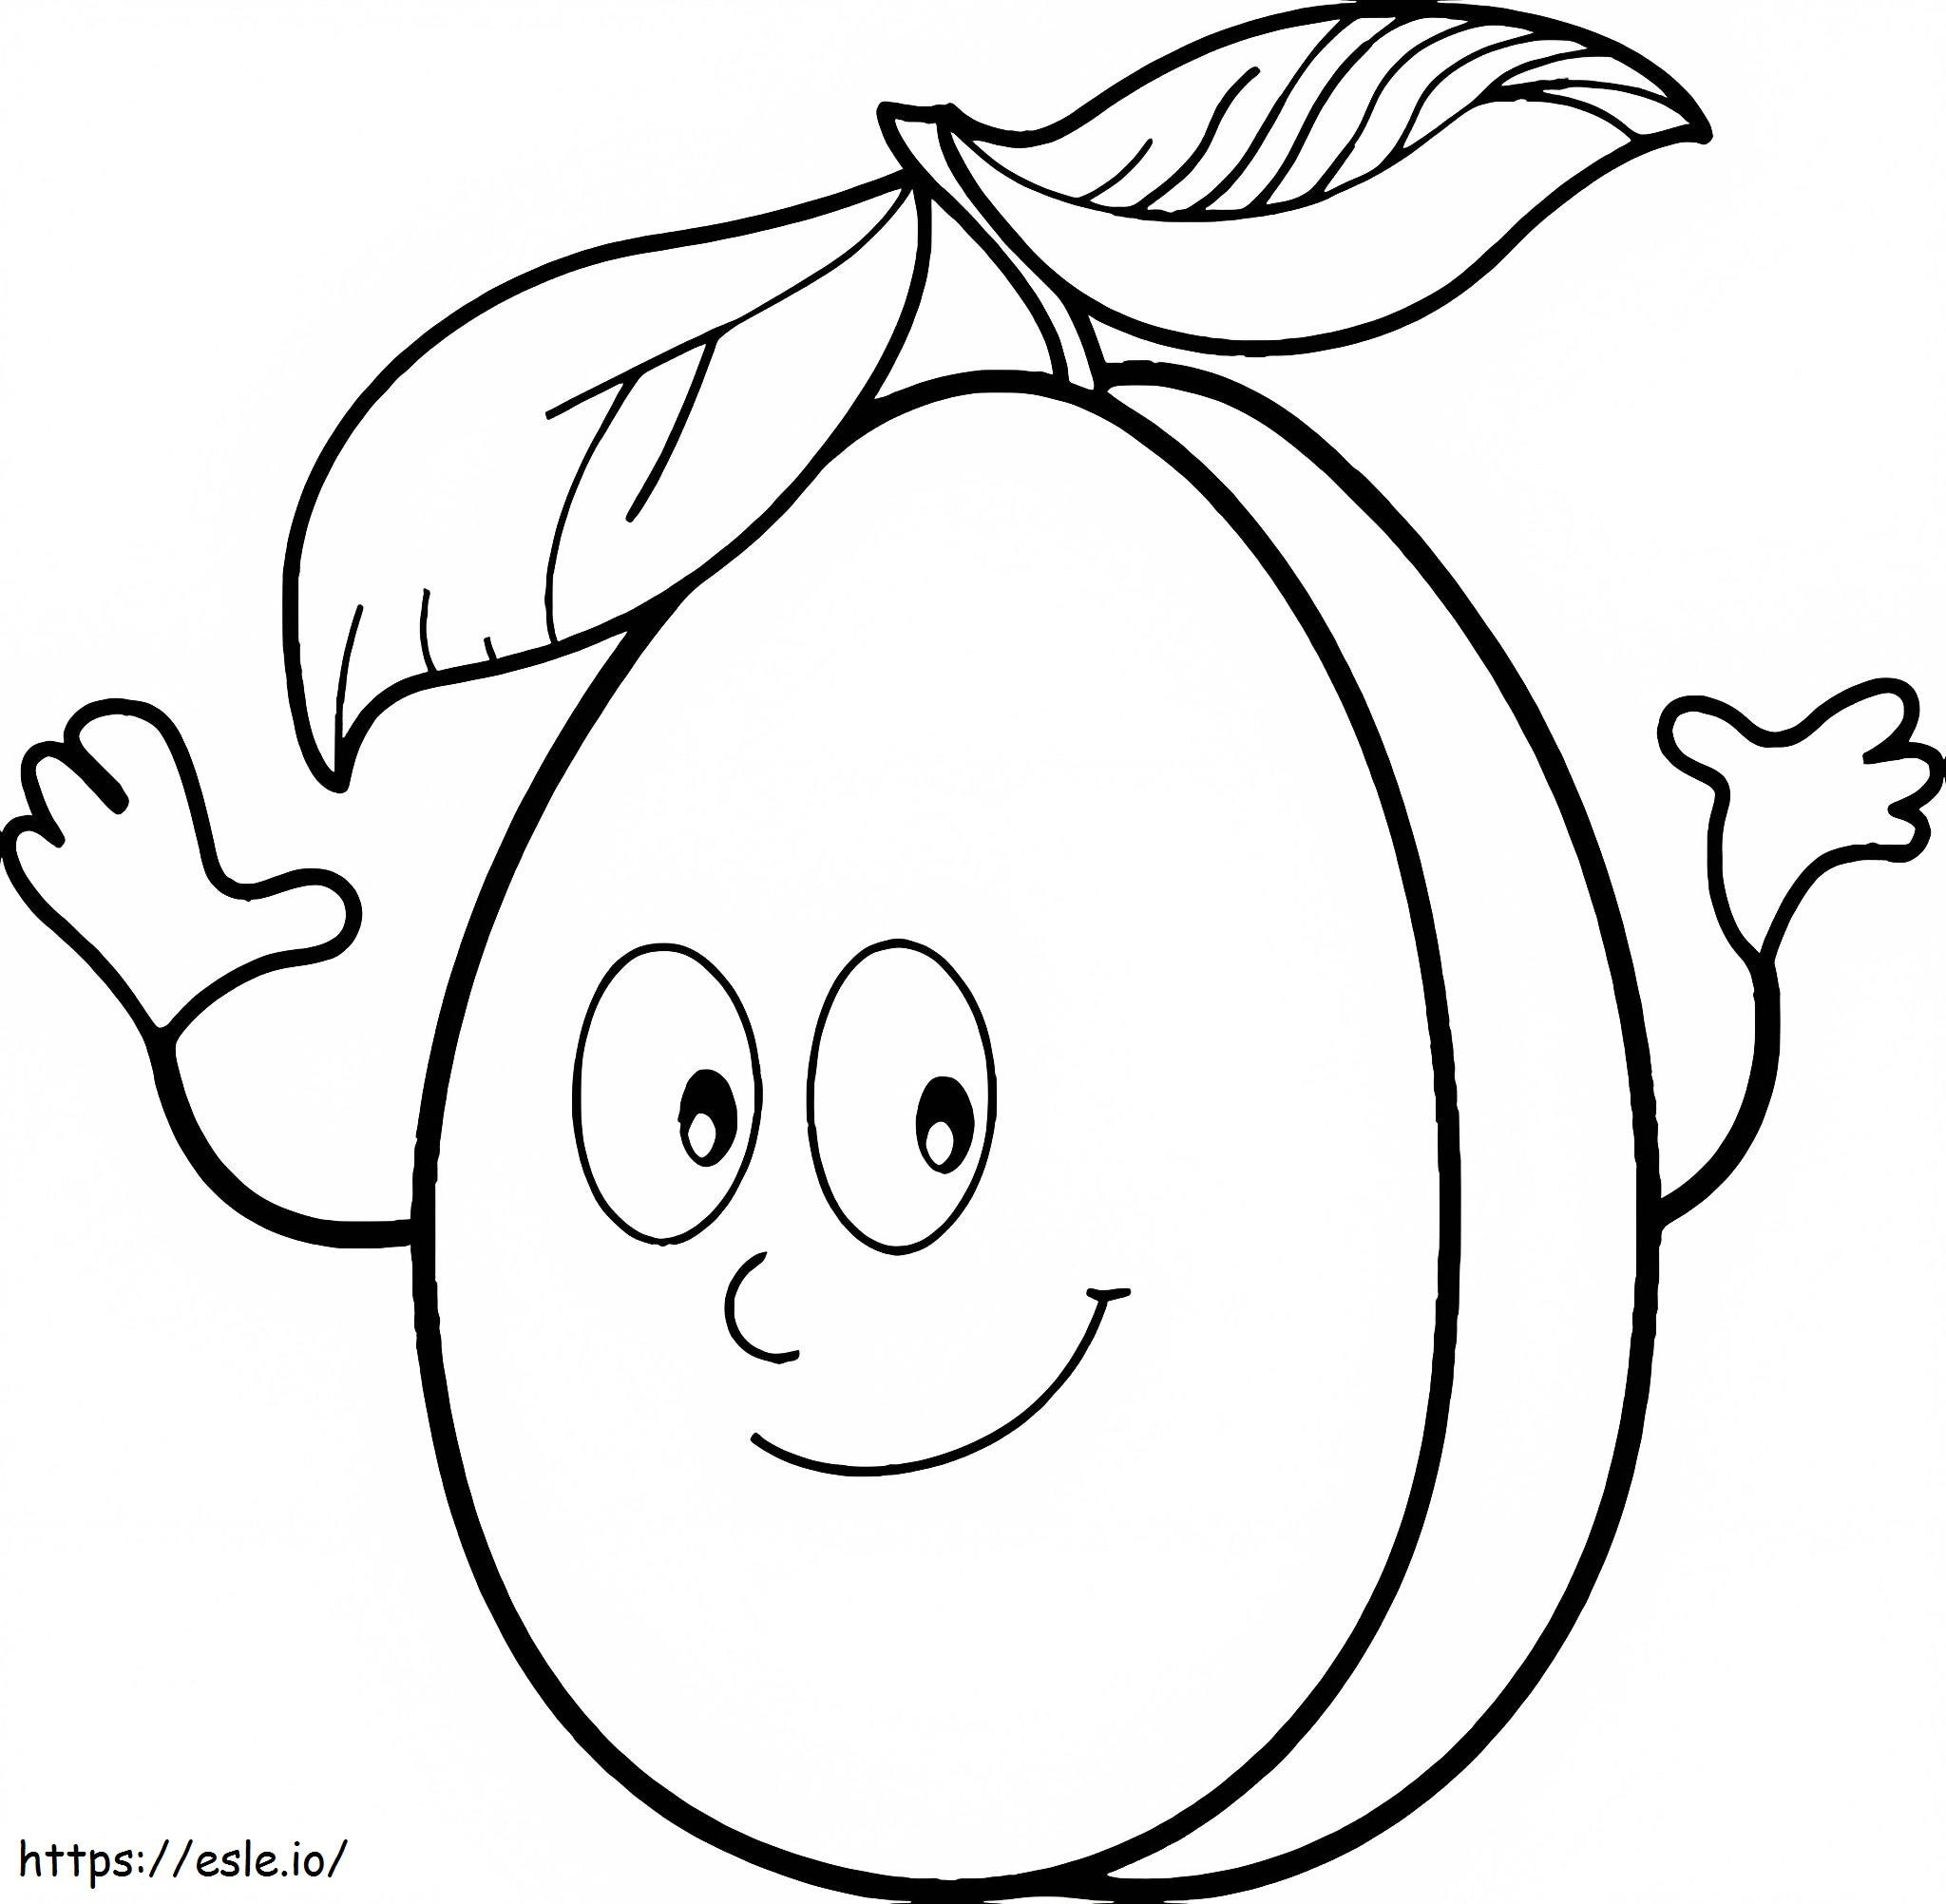 Funny Apricot coloring page